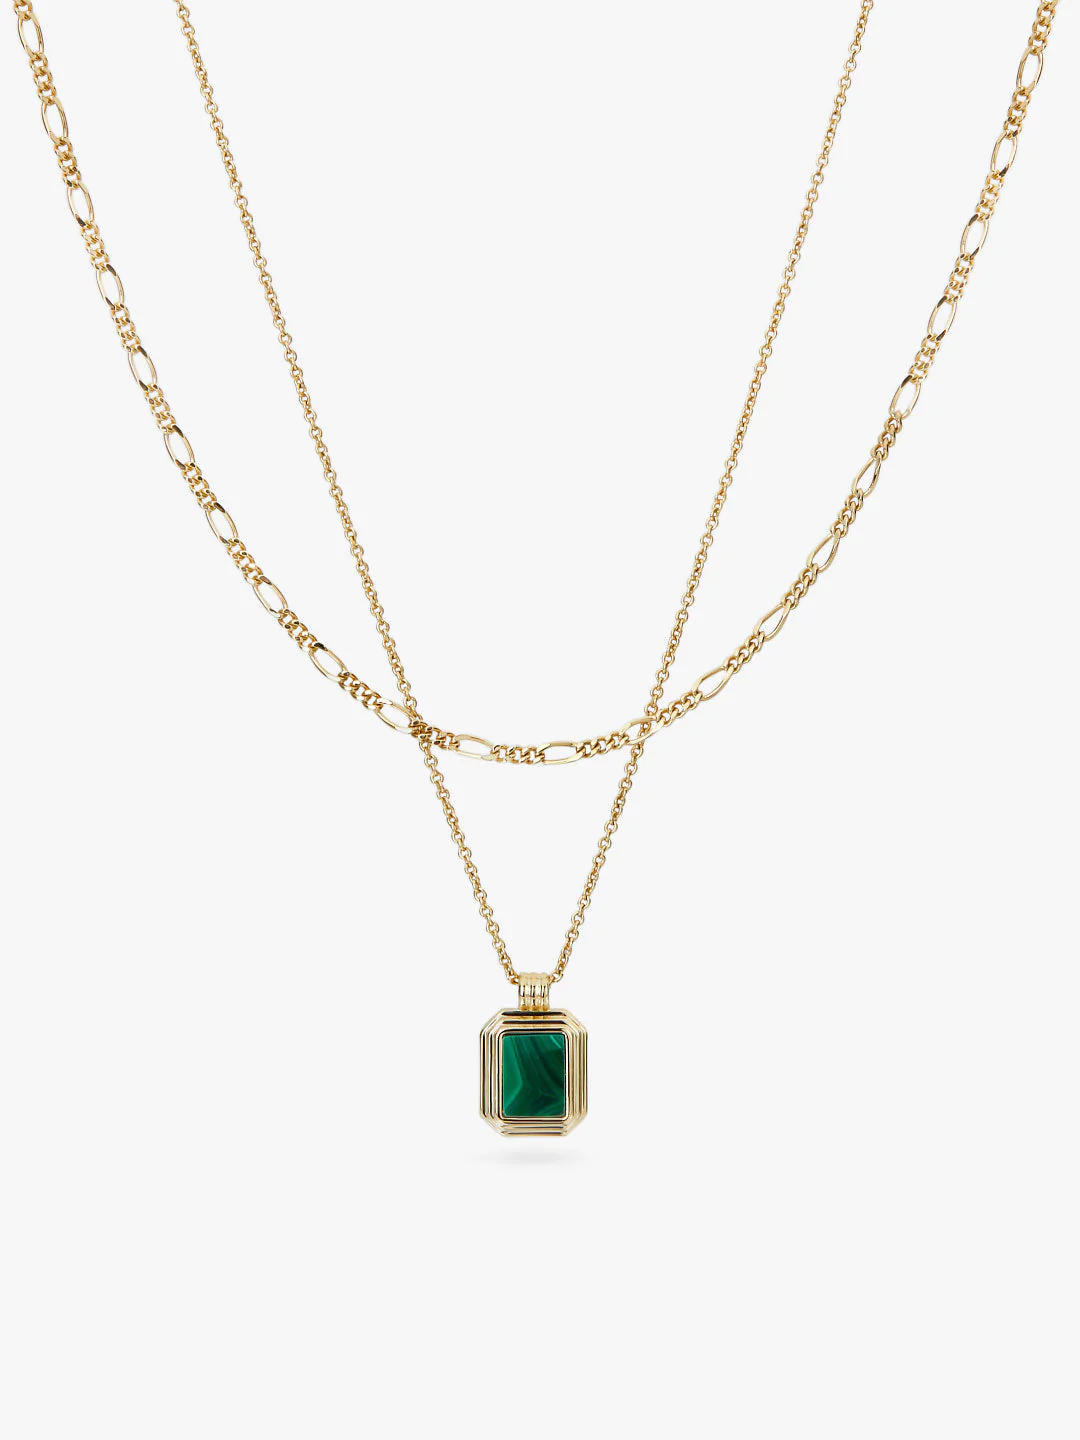 Ana Luisa + Temple Green Layered Necklace Set